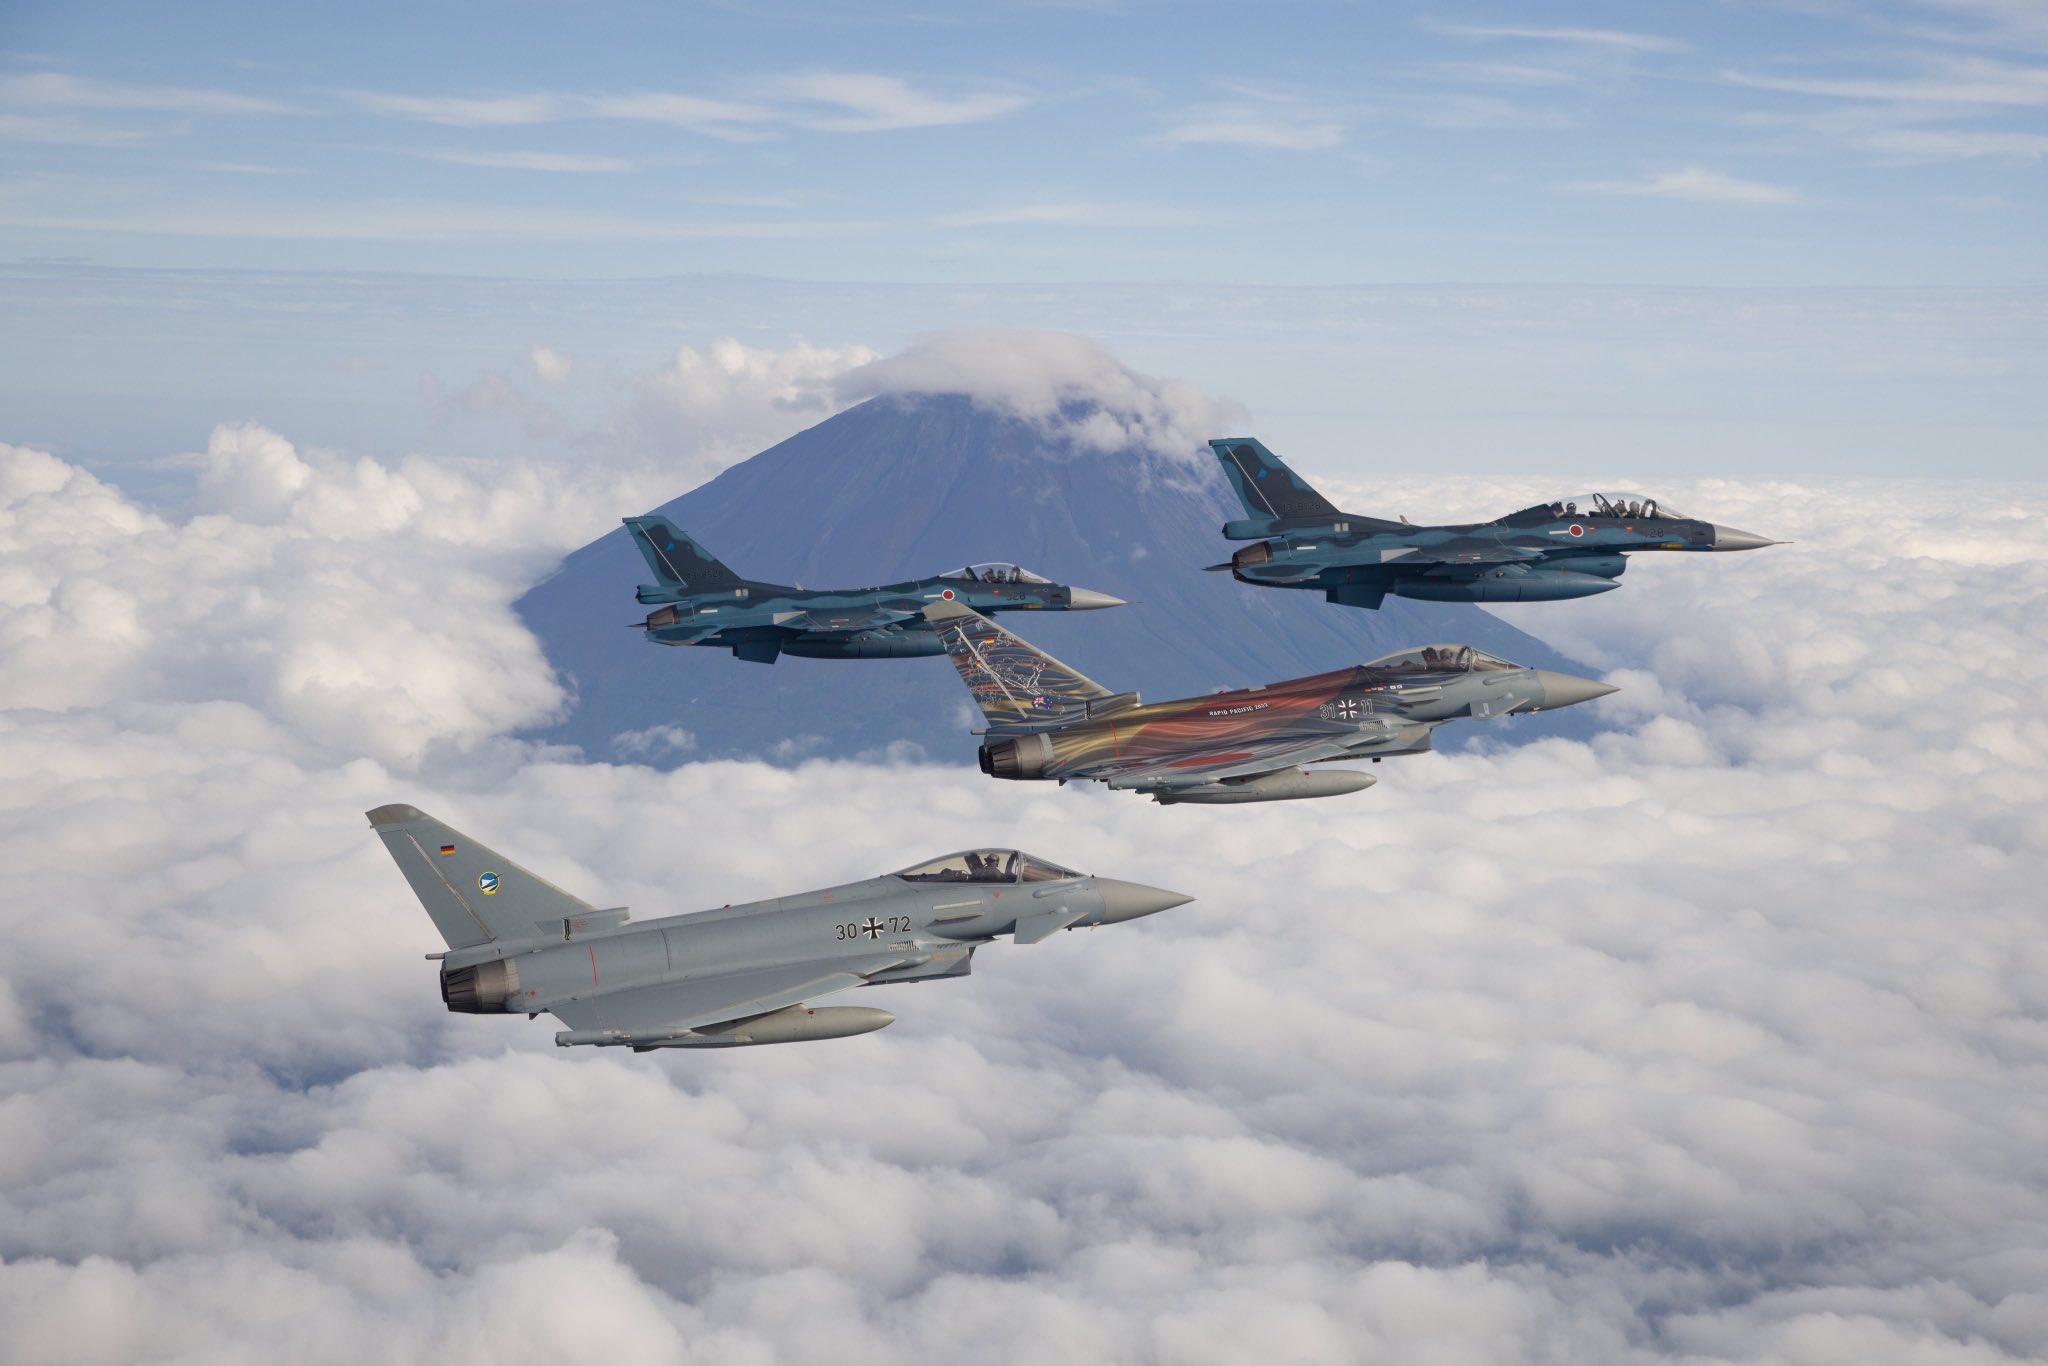 The Japan Air Self Defense Force and German Air Force conducting their first bilateral exercise in Japanese territory